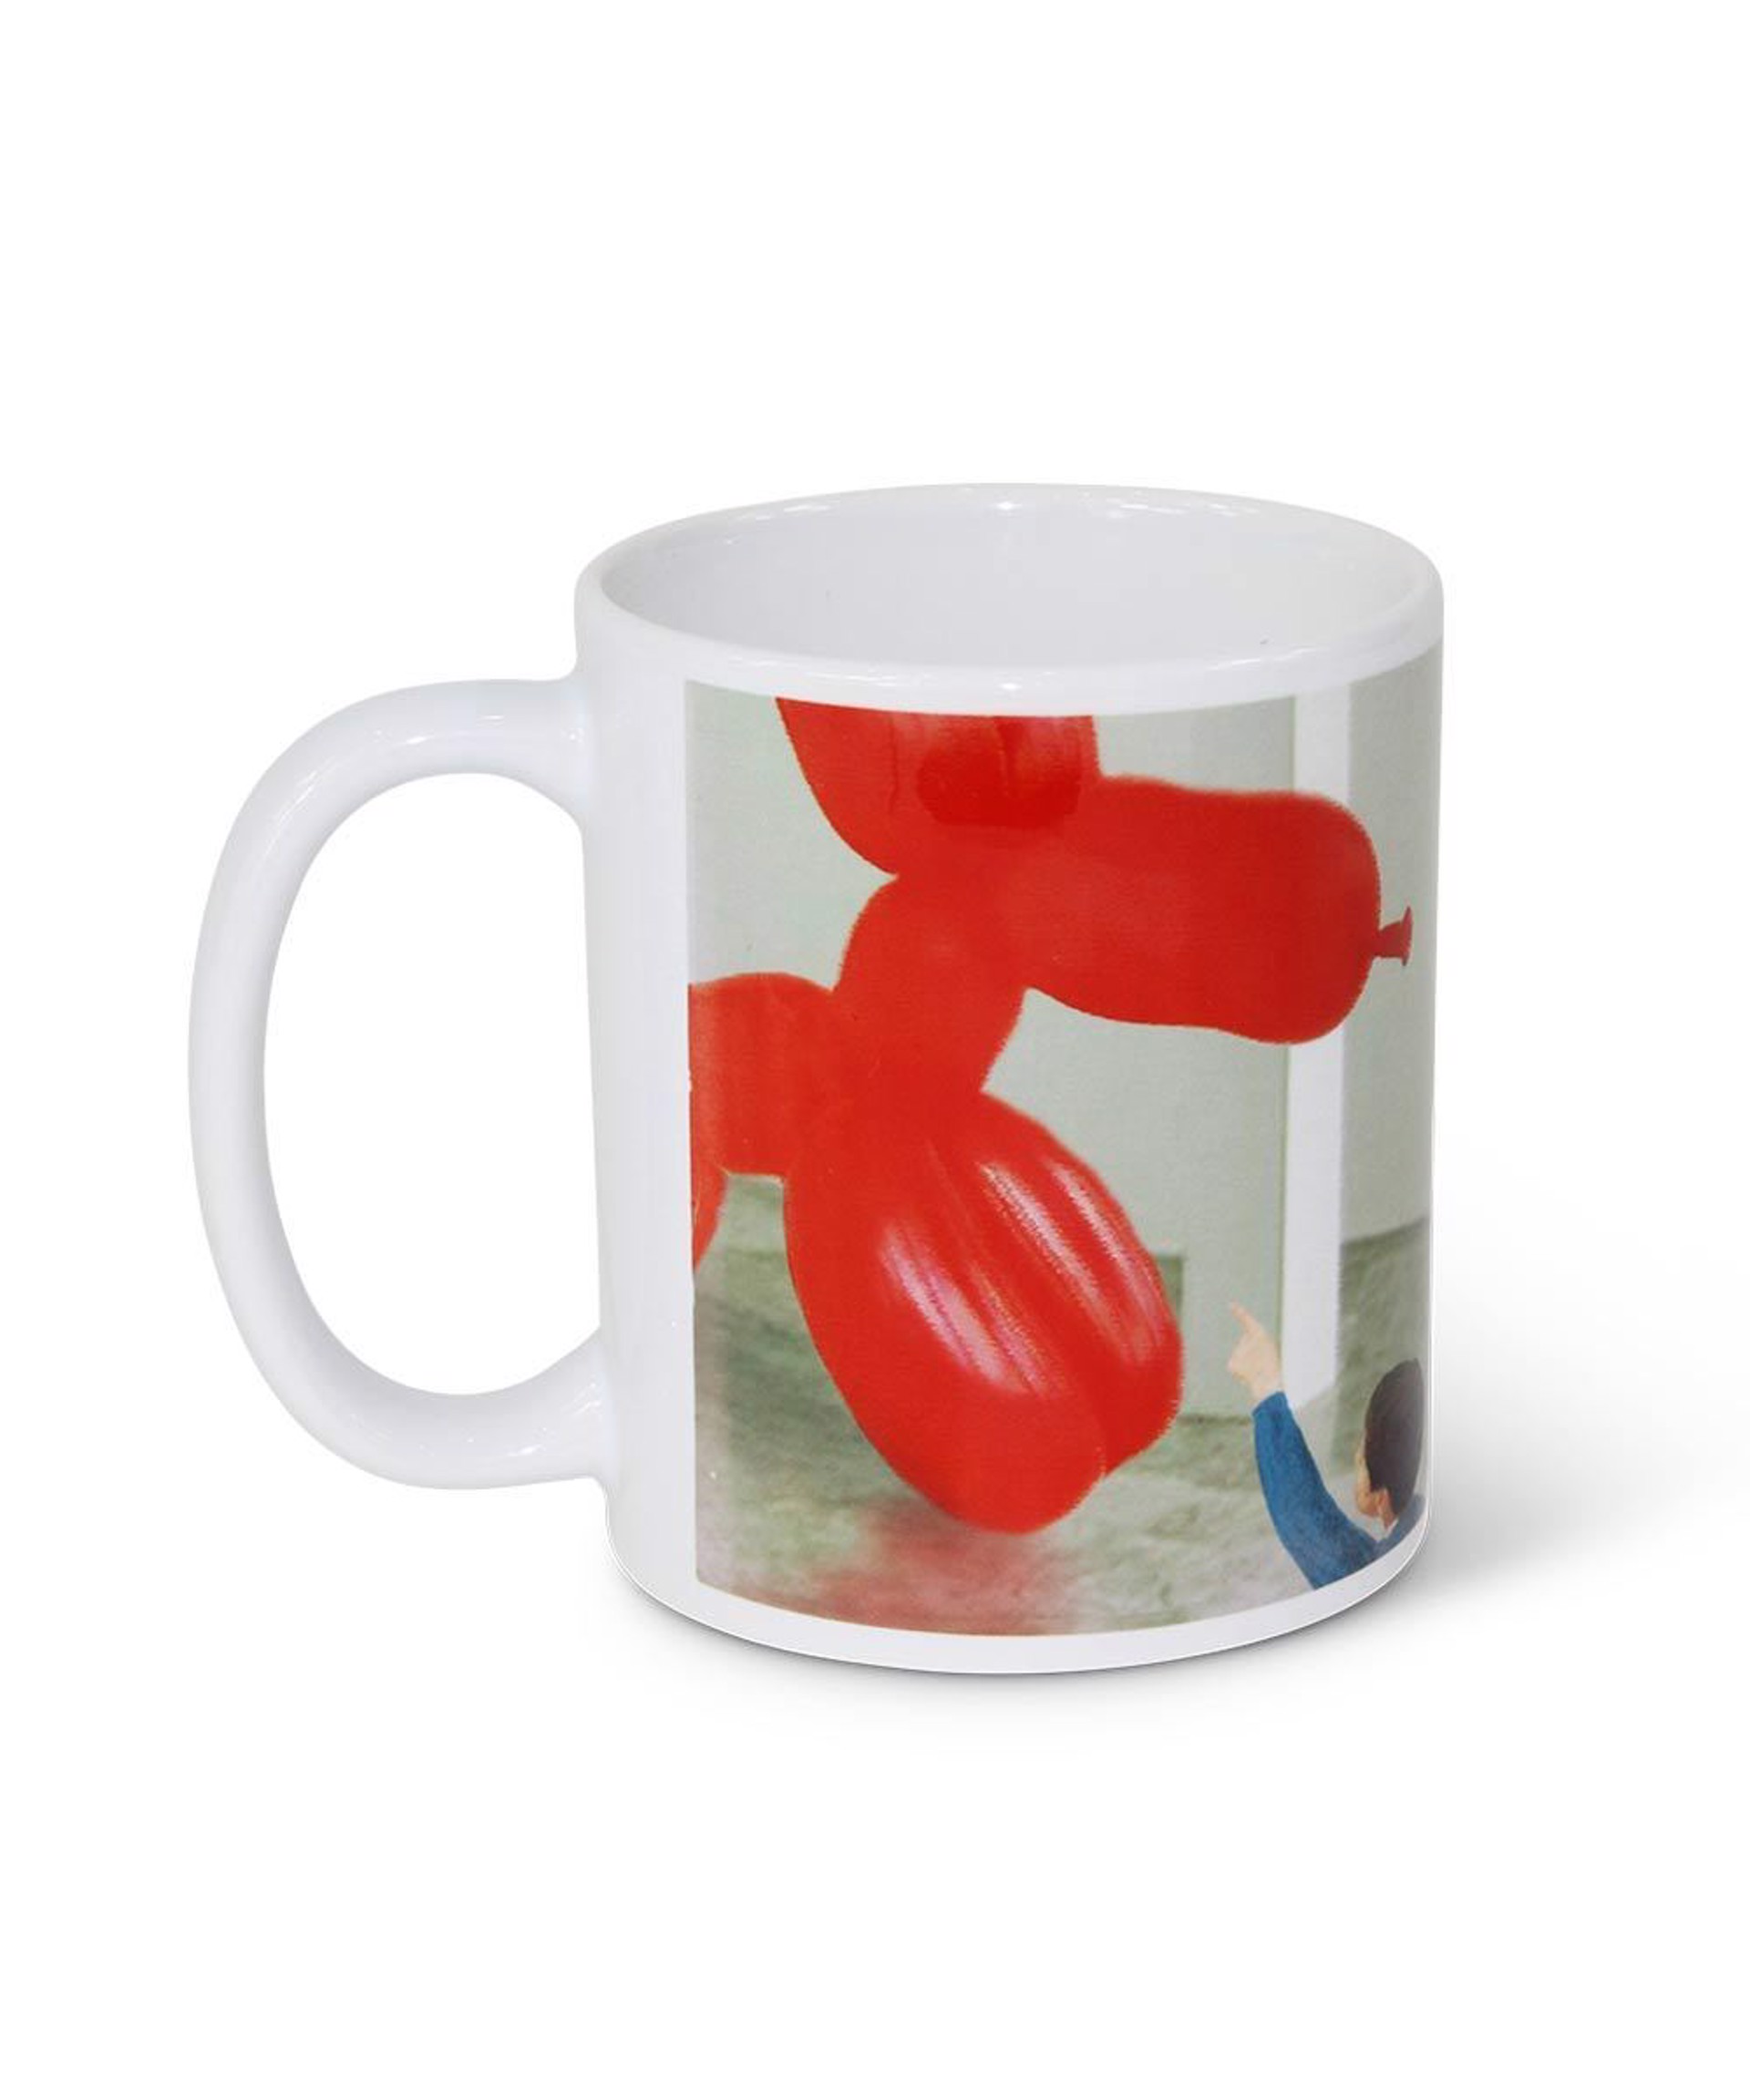 Want To Play With The Balloon Mug